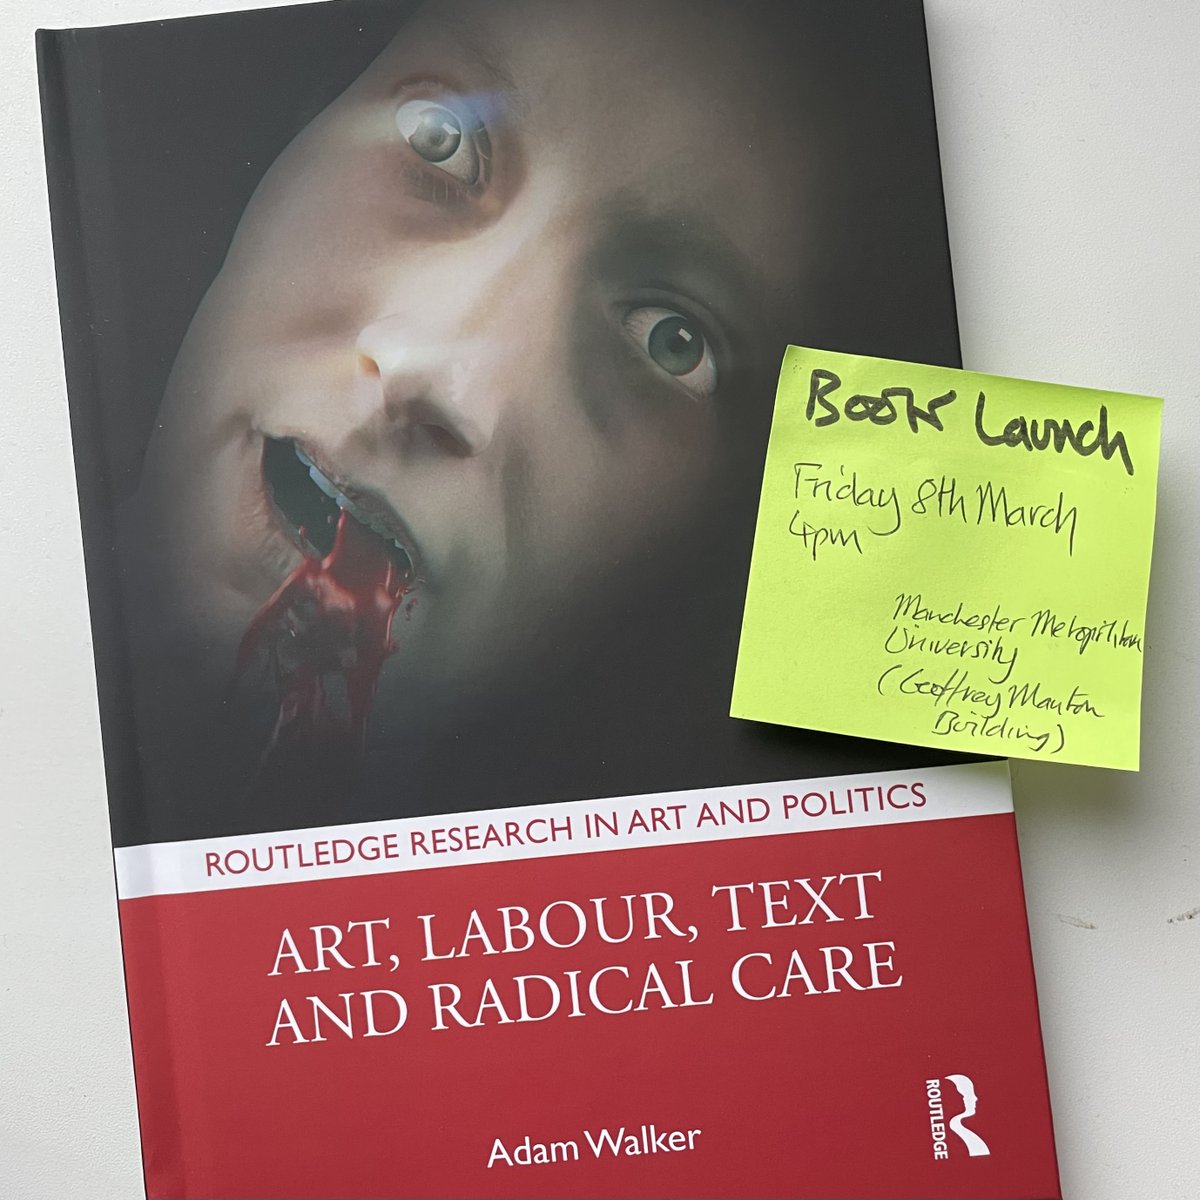 Book launch: Art, Labour, Text and Radical Care Friday 8th March, 16:00-18:00 Geoffrey Manton, Manchester Metropolitan University Join us at 4pm on 8th March to celebrate the launch of the new book 'Art, Labour Text and Radical Care' by Dr Adam Walker, published by Routledge.